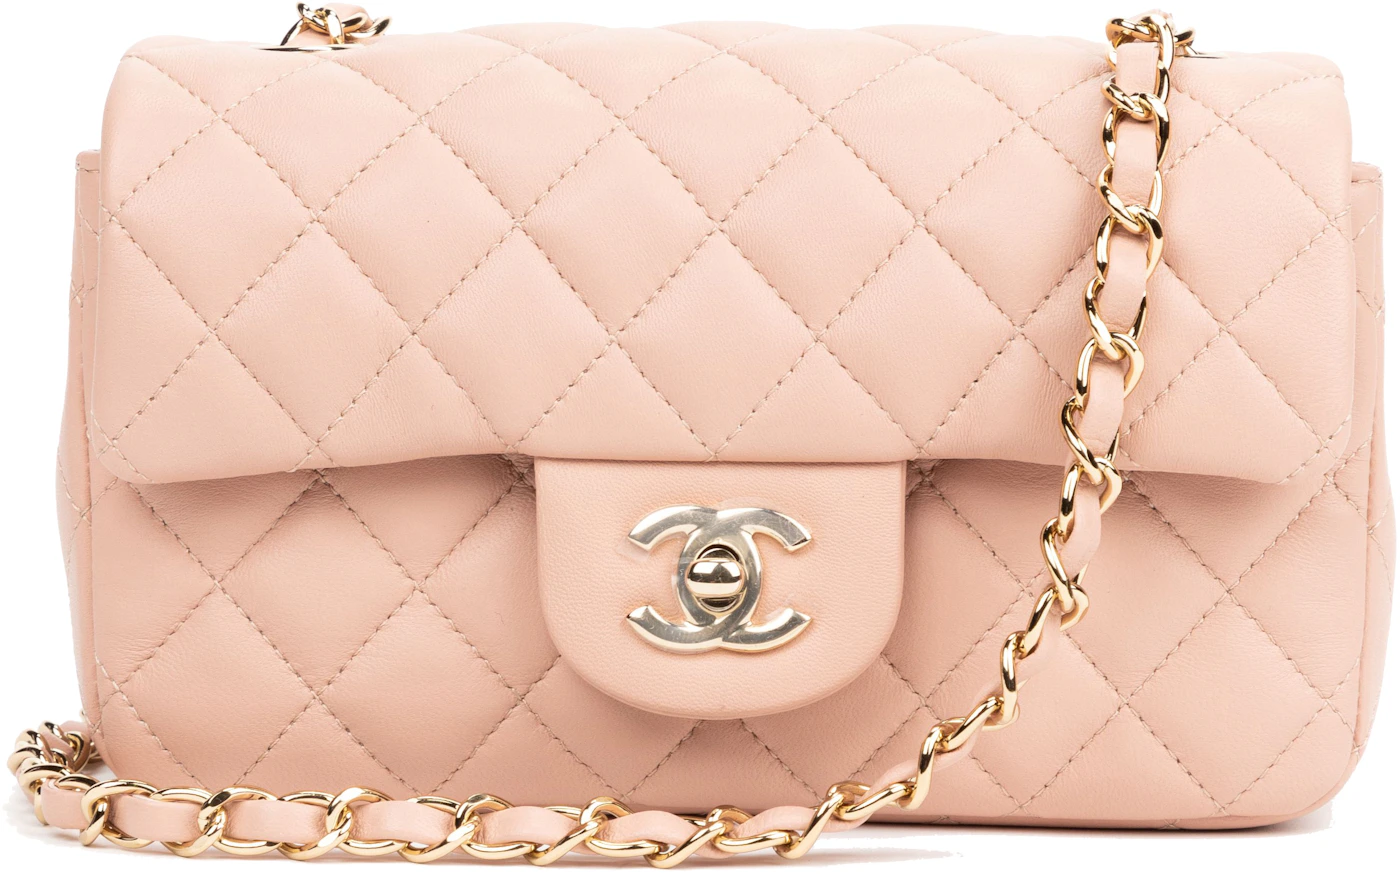 Chanel Classic Single Flap Bag Quilted Caviar Mini Pink